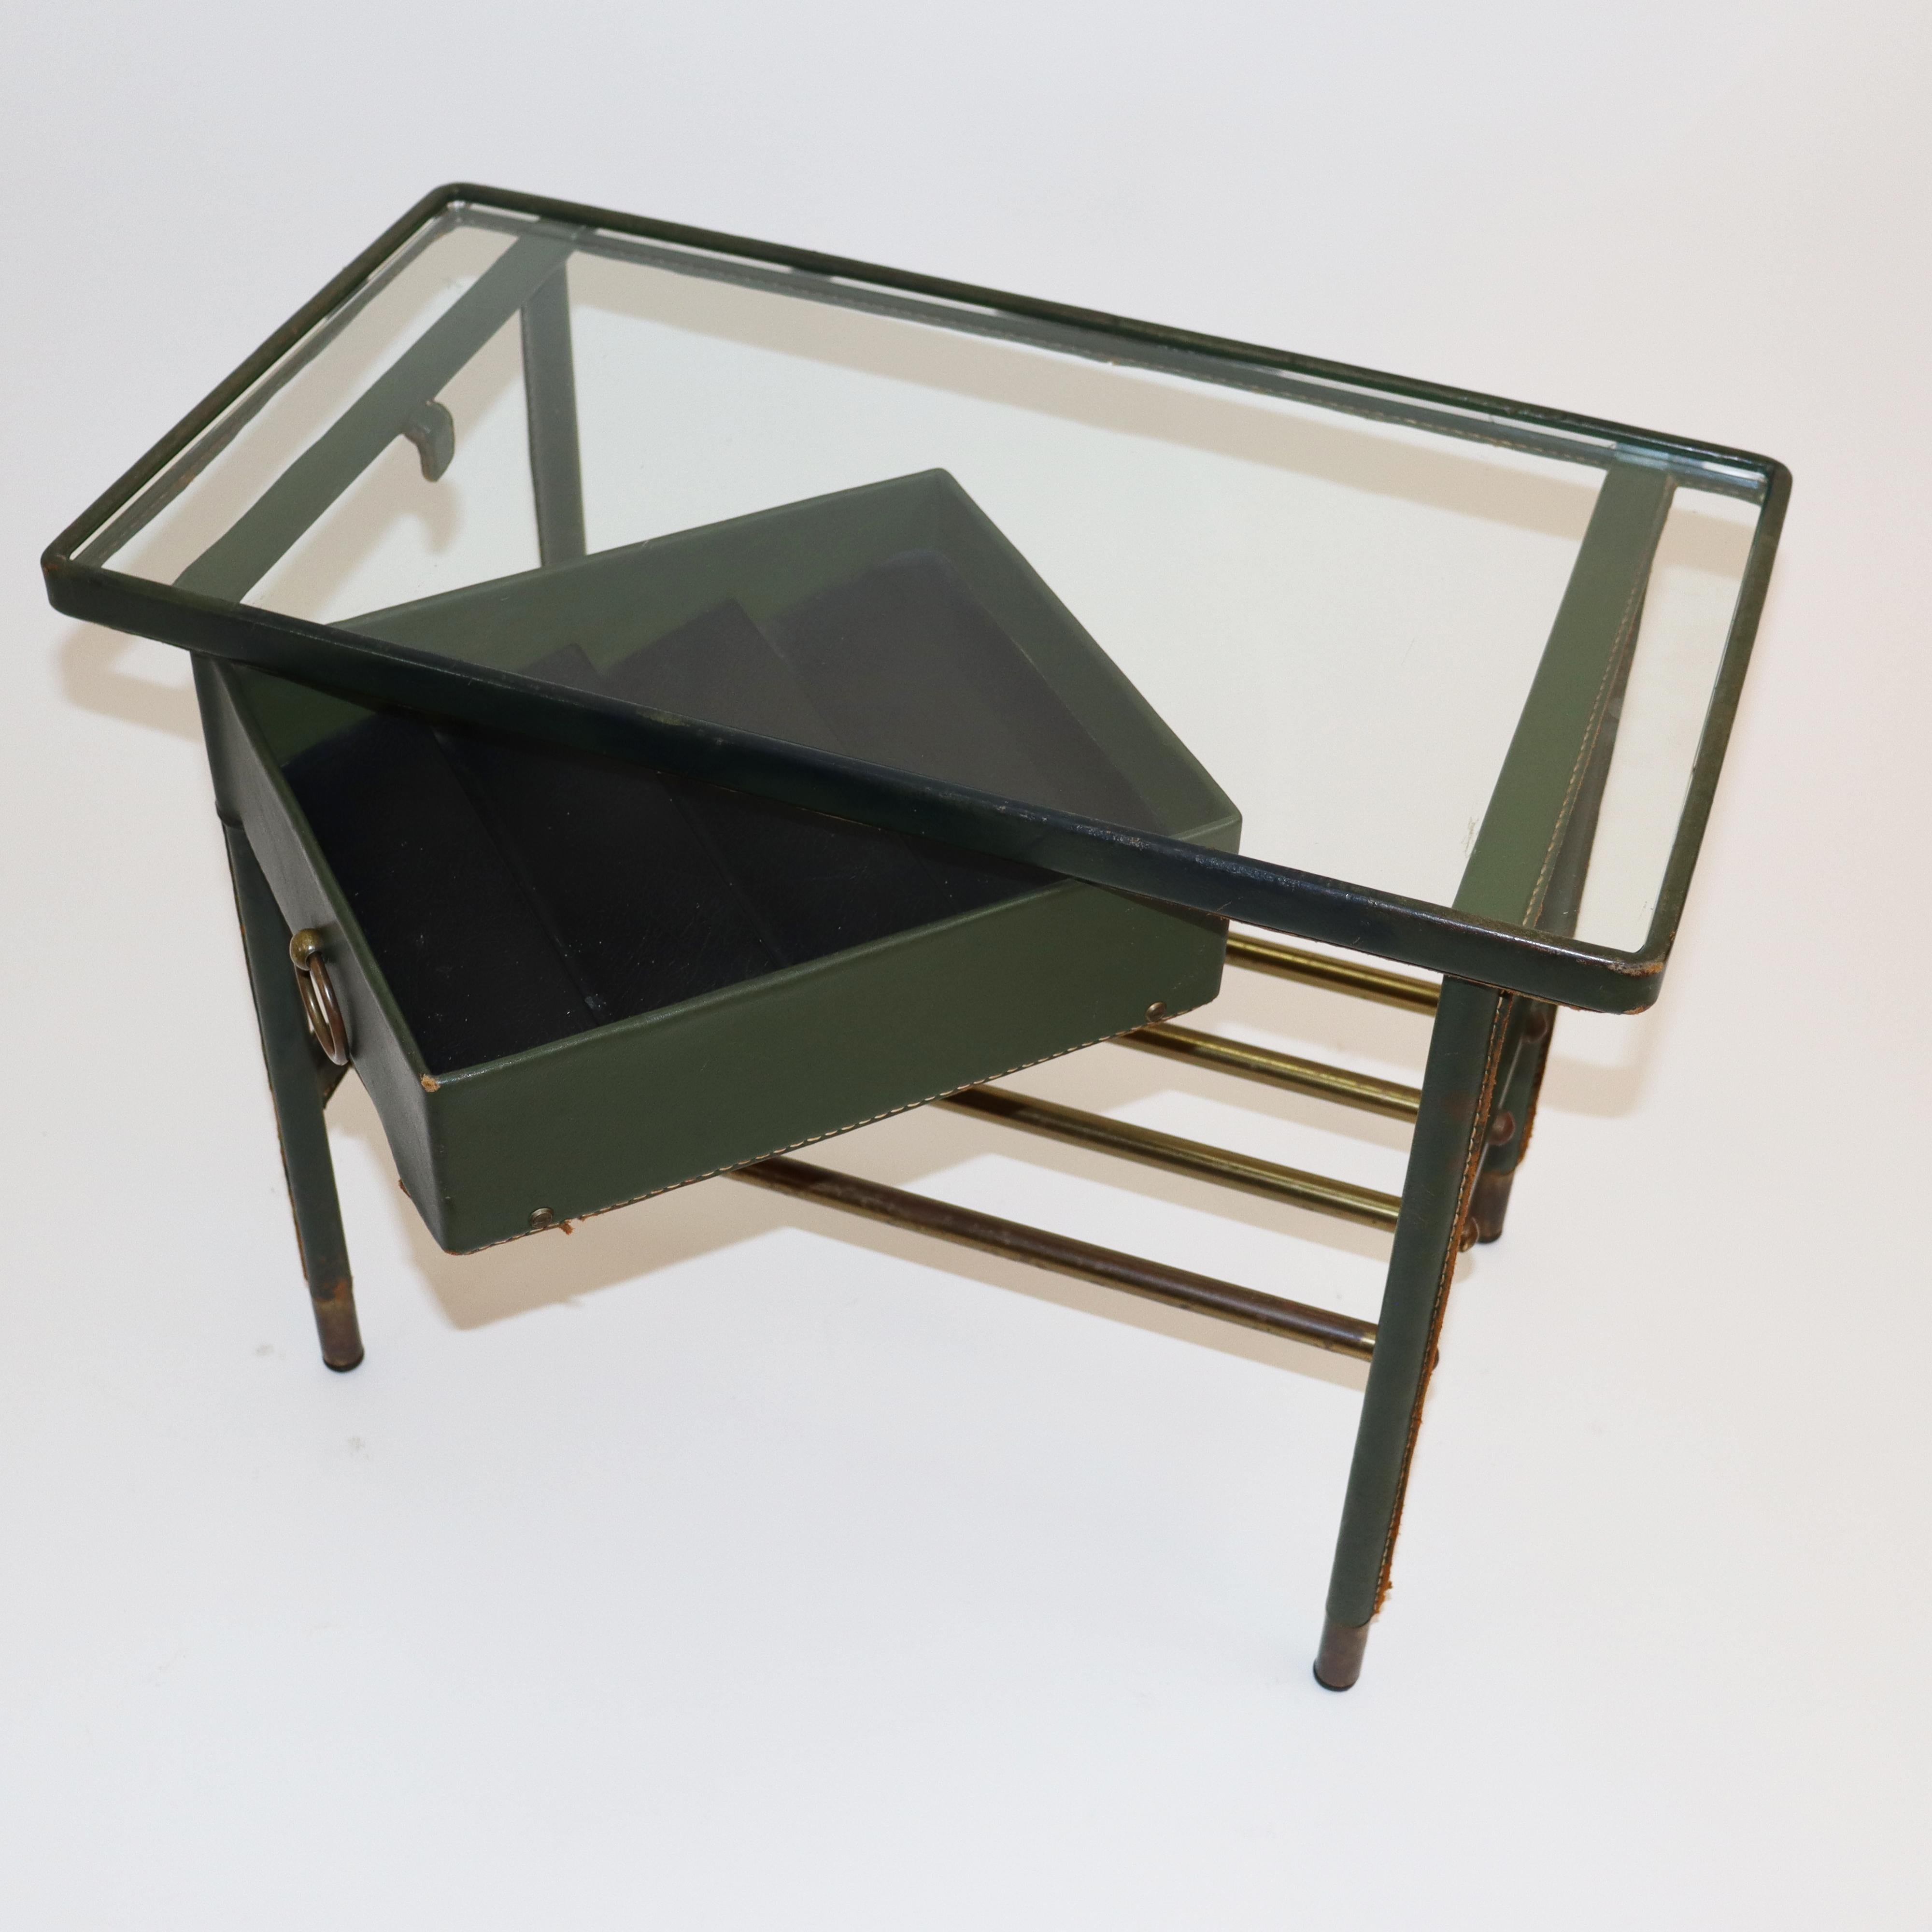 Mid-Century Modern Jacques Adnet Handstitched Green Leather Nightstand, 1950s, France For Sale